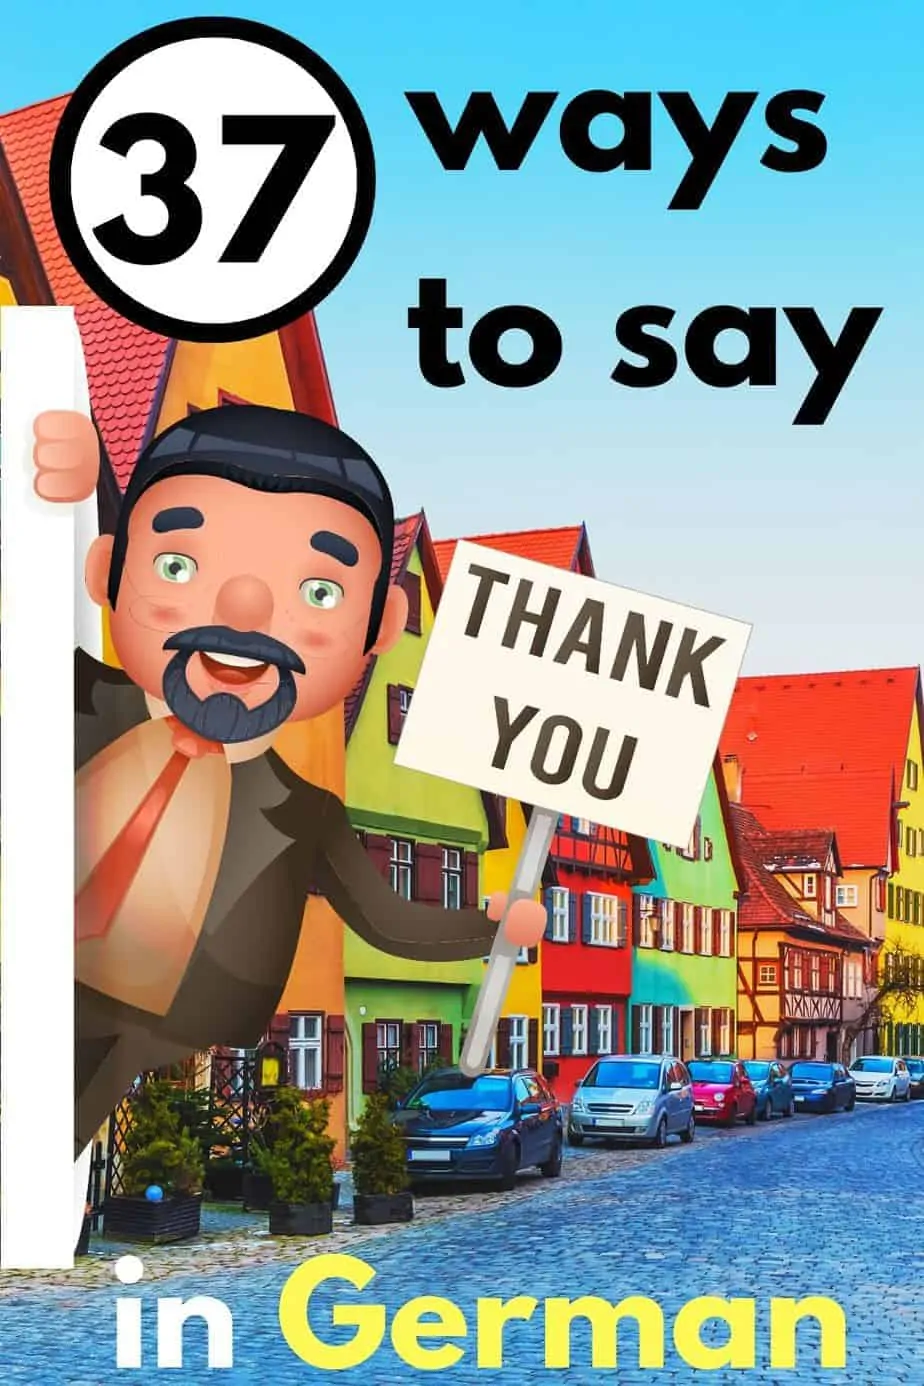 37 Ways To Say Thank You in German